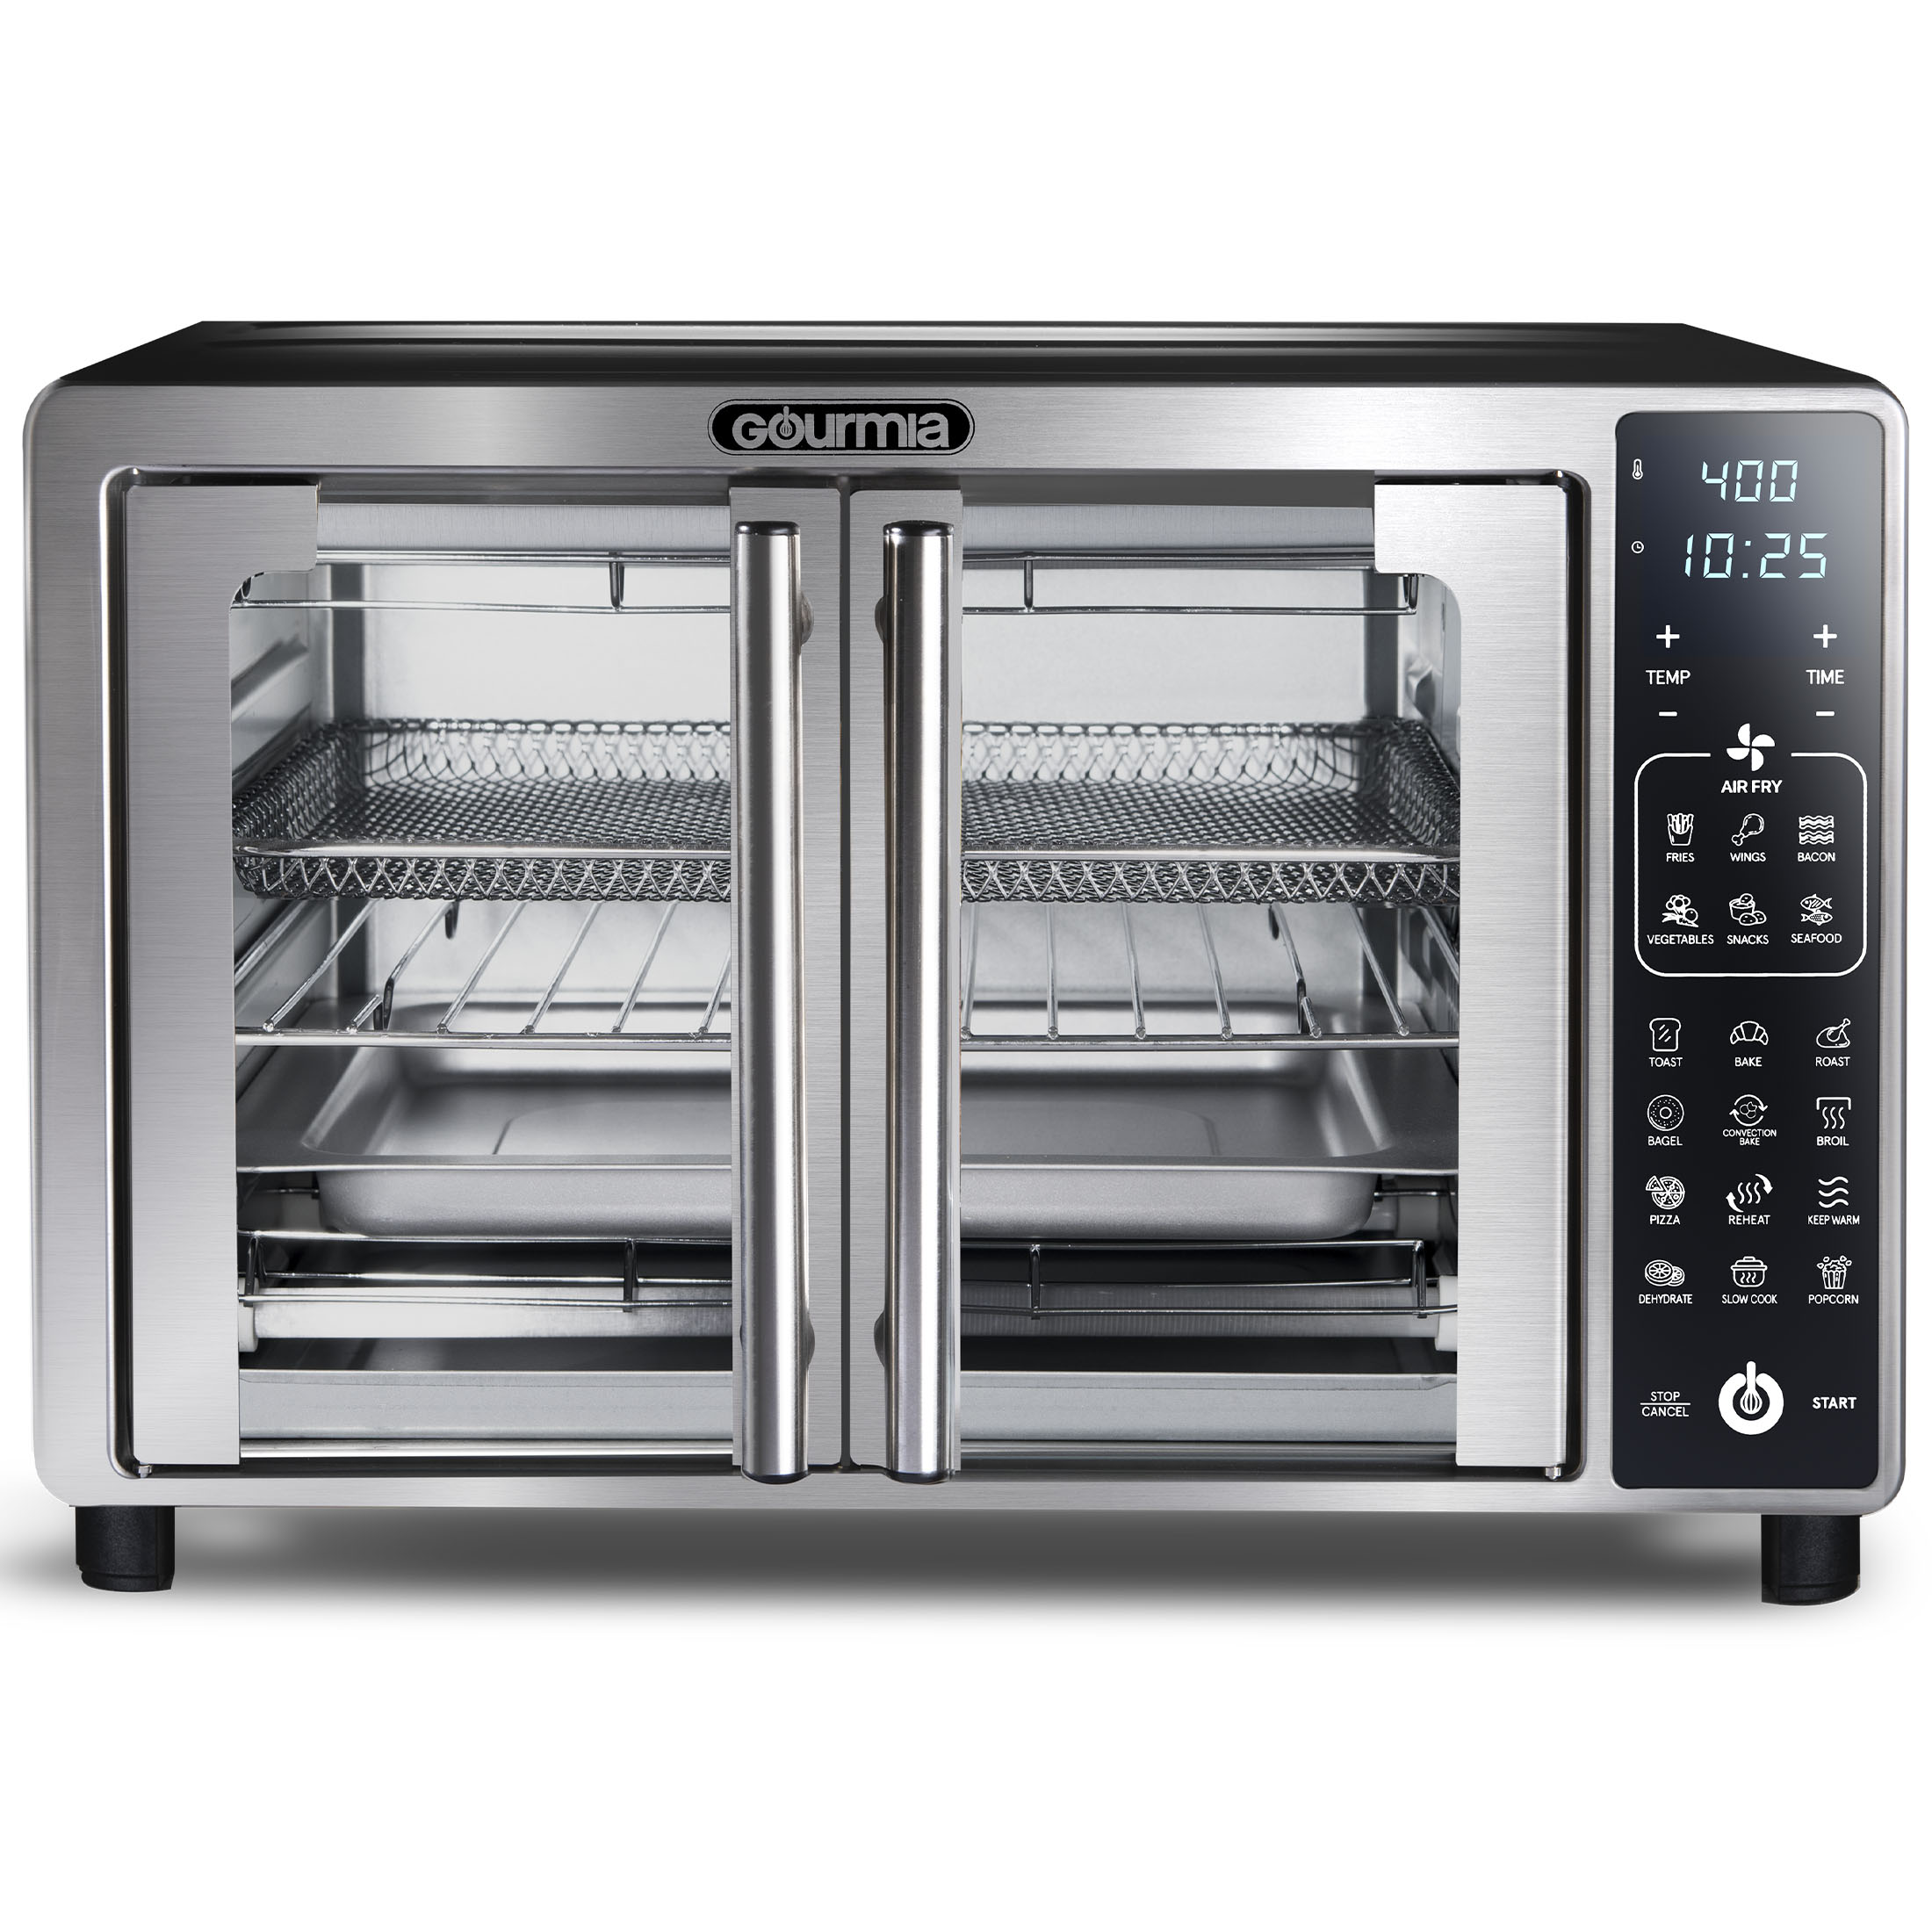 Gourmia Digital Air Fryer Toaster Oven with Single-Pull French Doors, New - image 4 of 7